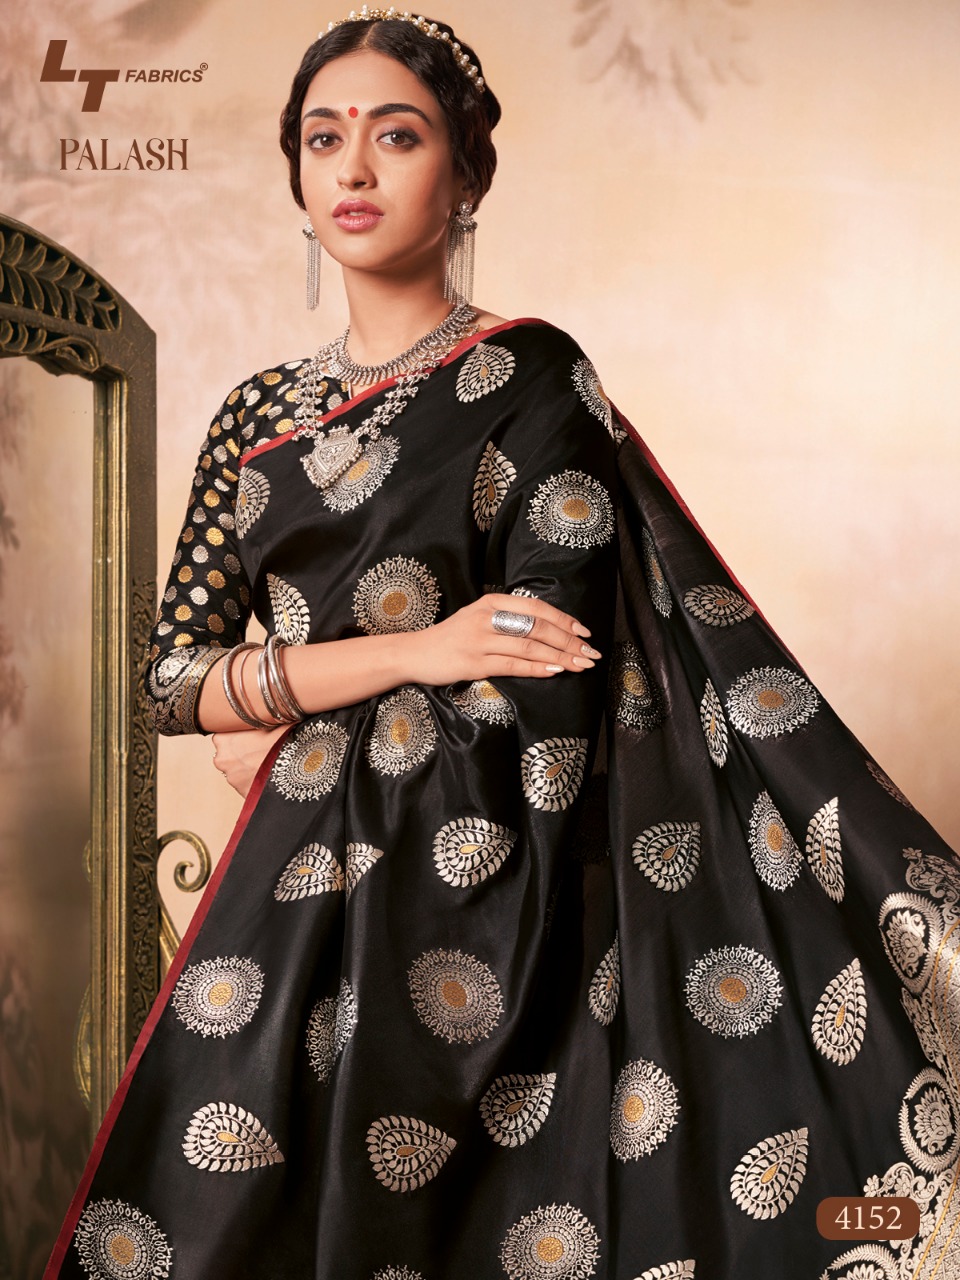 LT fashion palash simplicity in new and stylish look sarees in wholesale prices